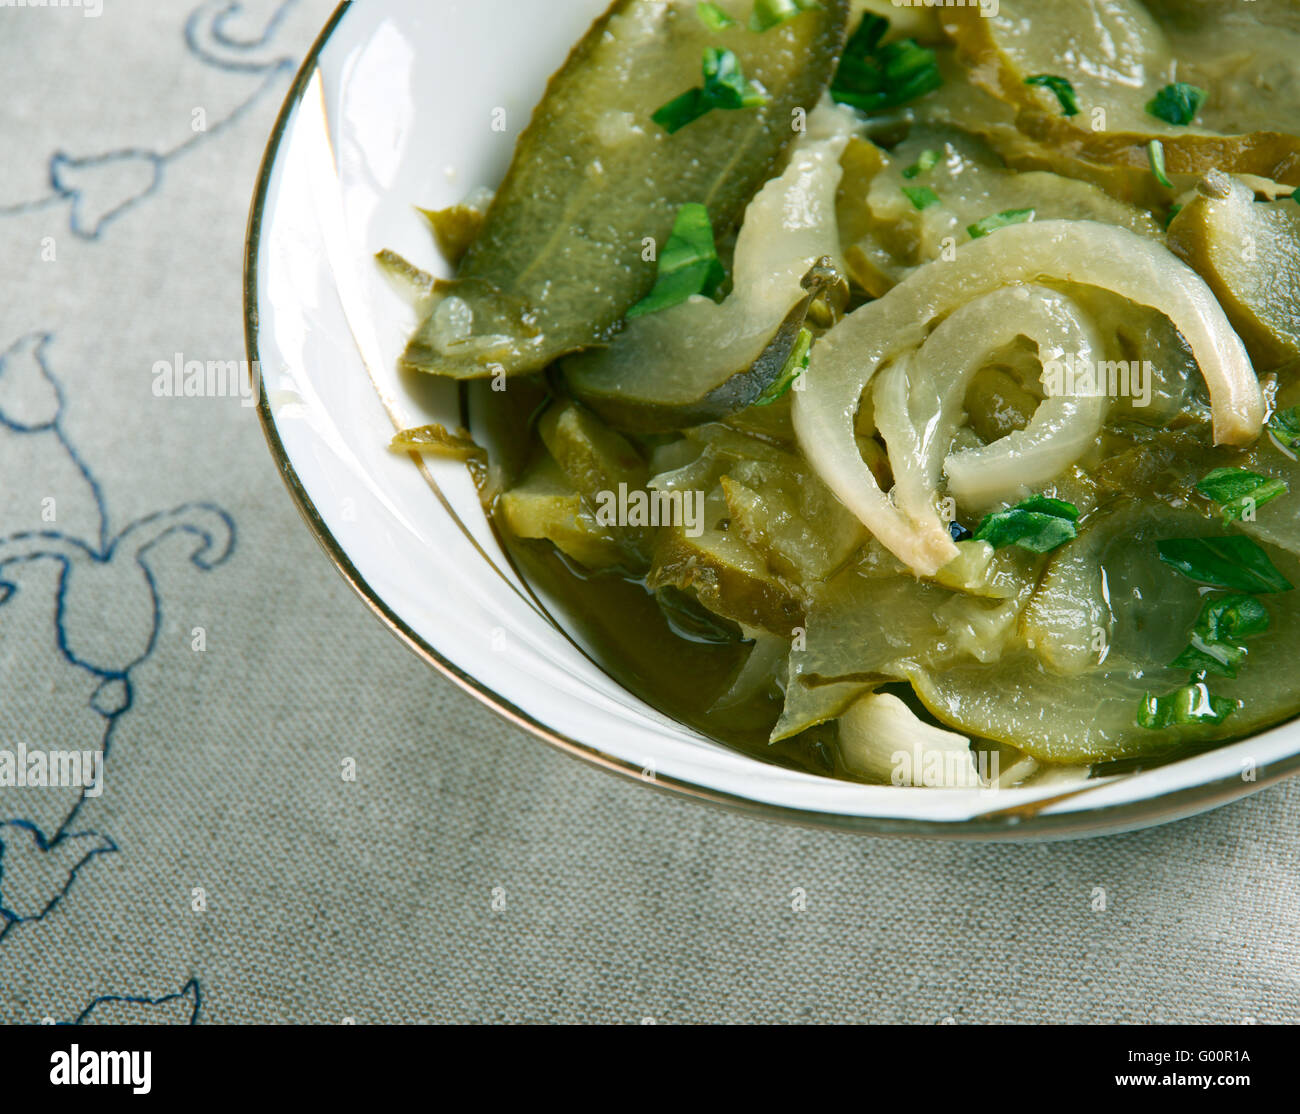 salad of pickled cucumbers Stock Photo